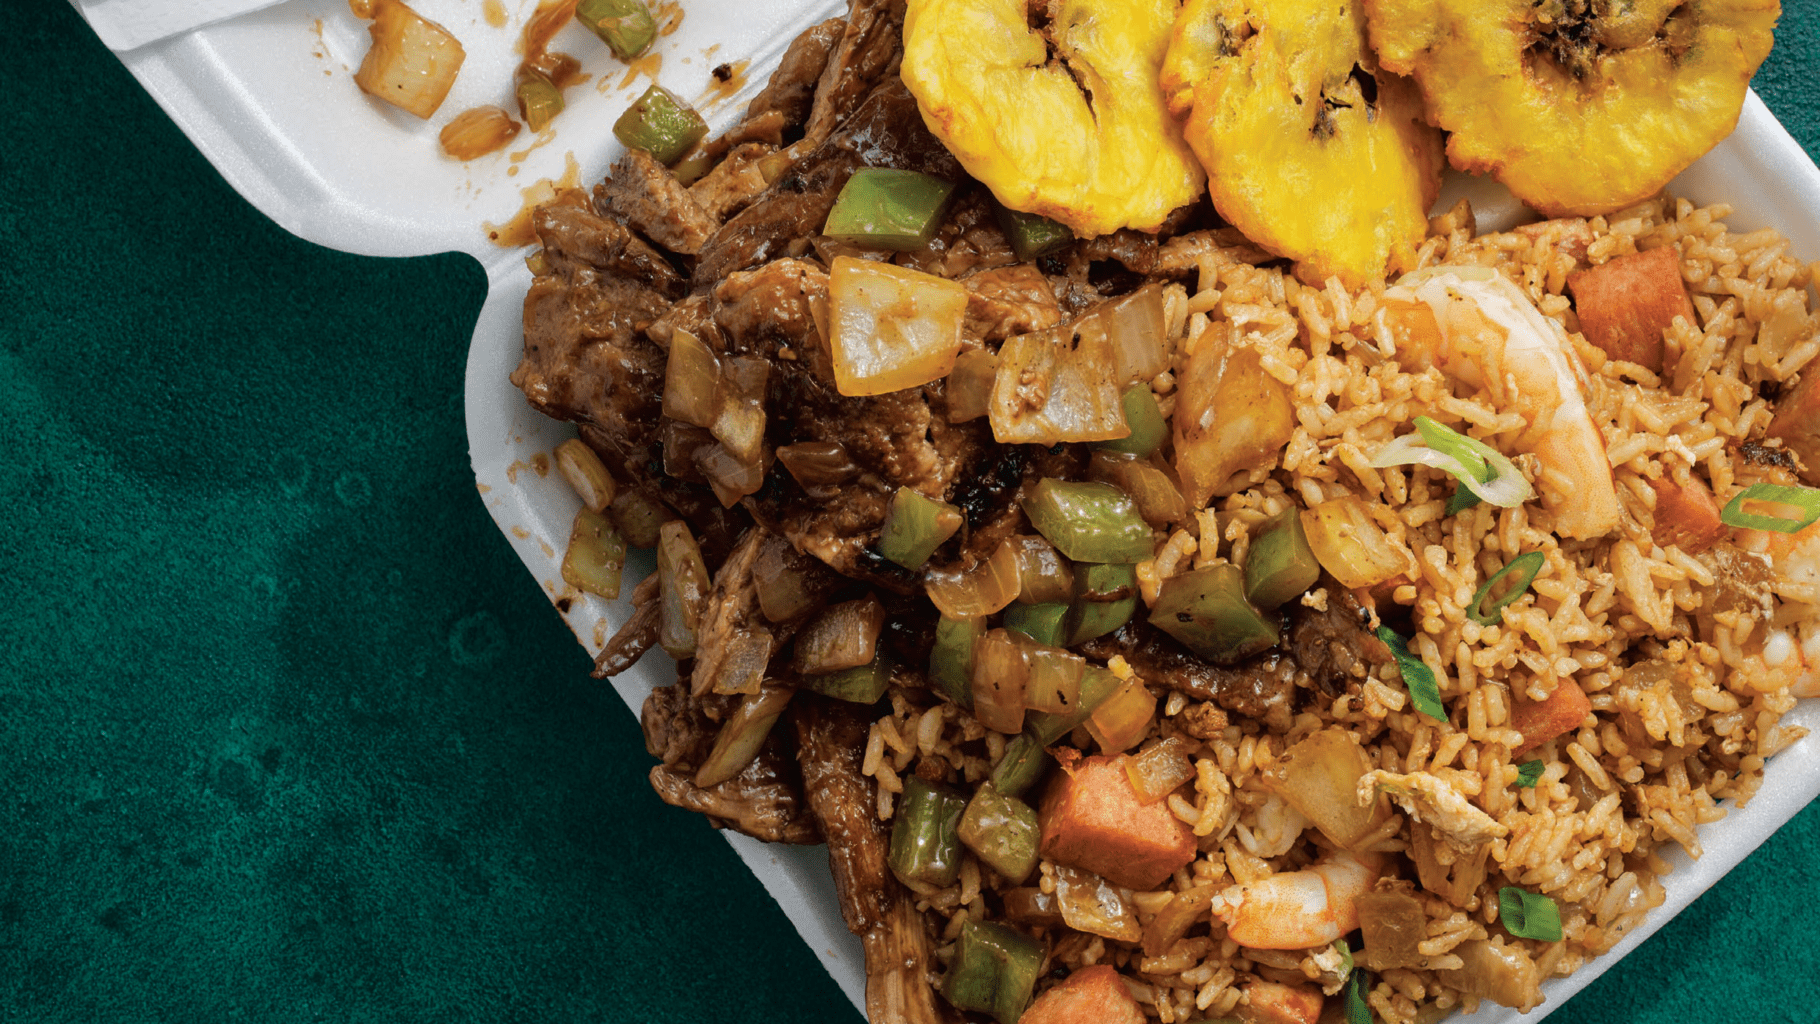 Arroz Chino Boricua excerpted from Diasporican: A Puerto Rican Cookbook by Illyanna Maisonet.